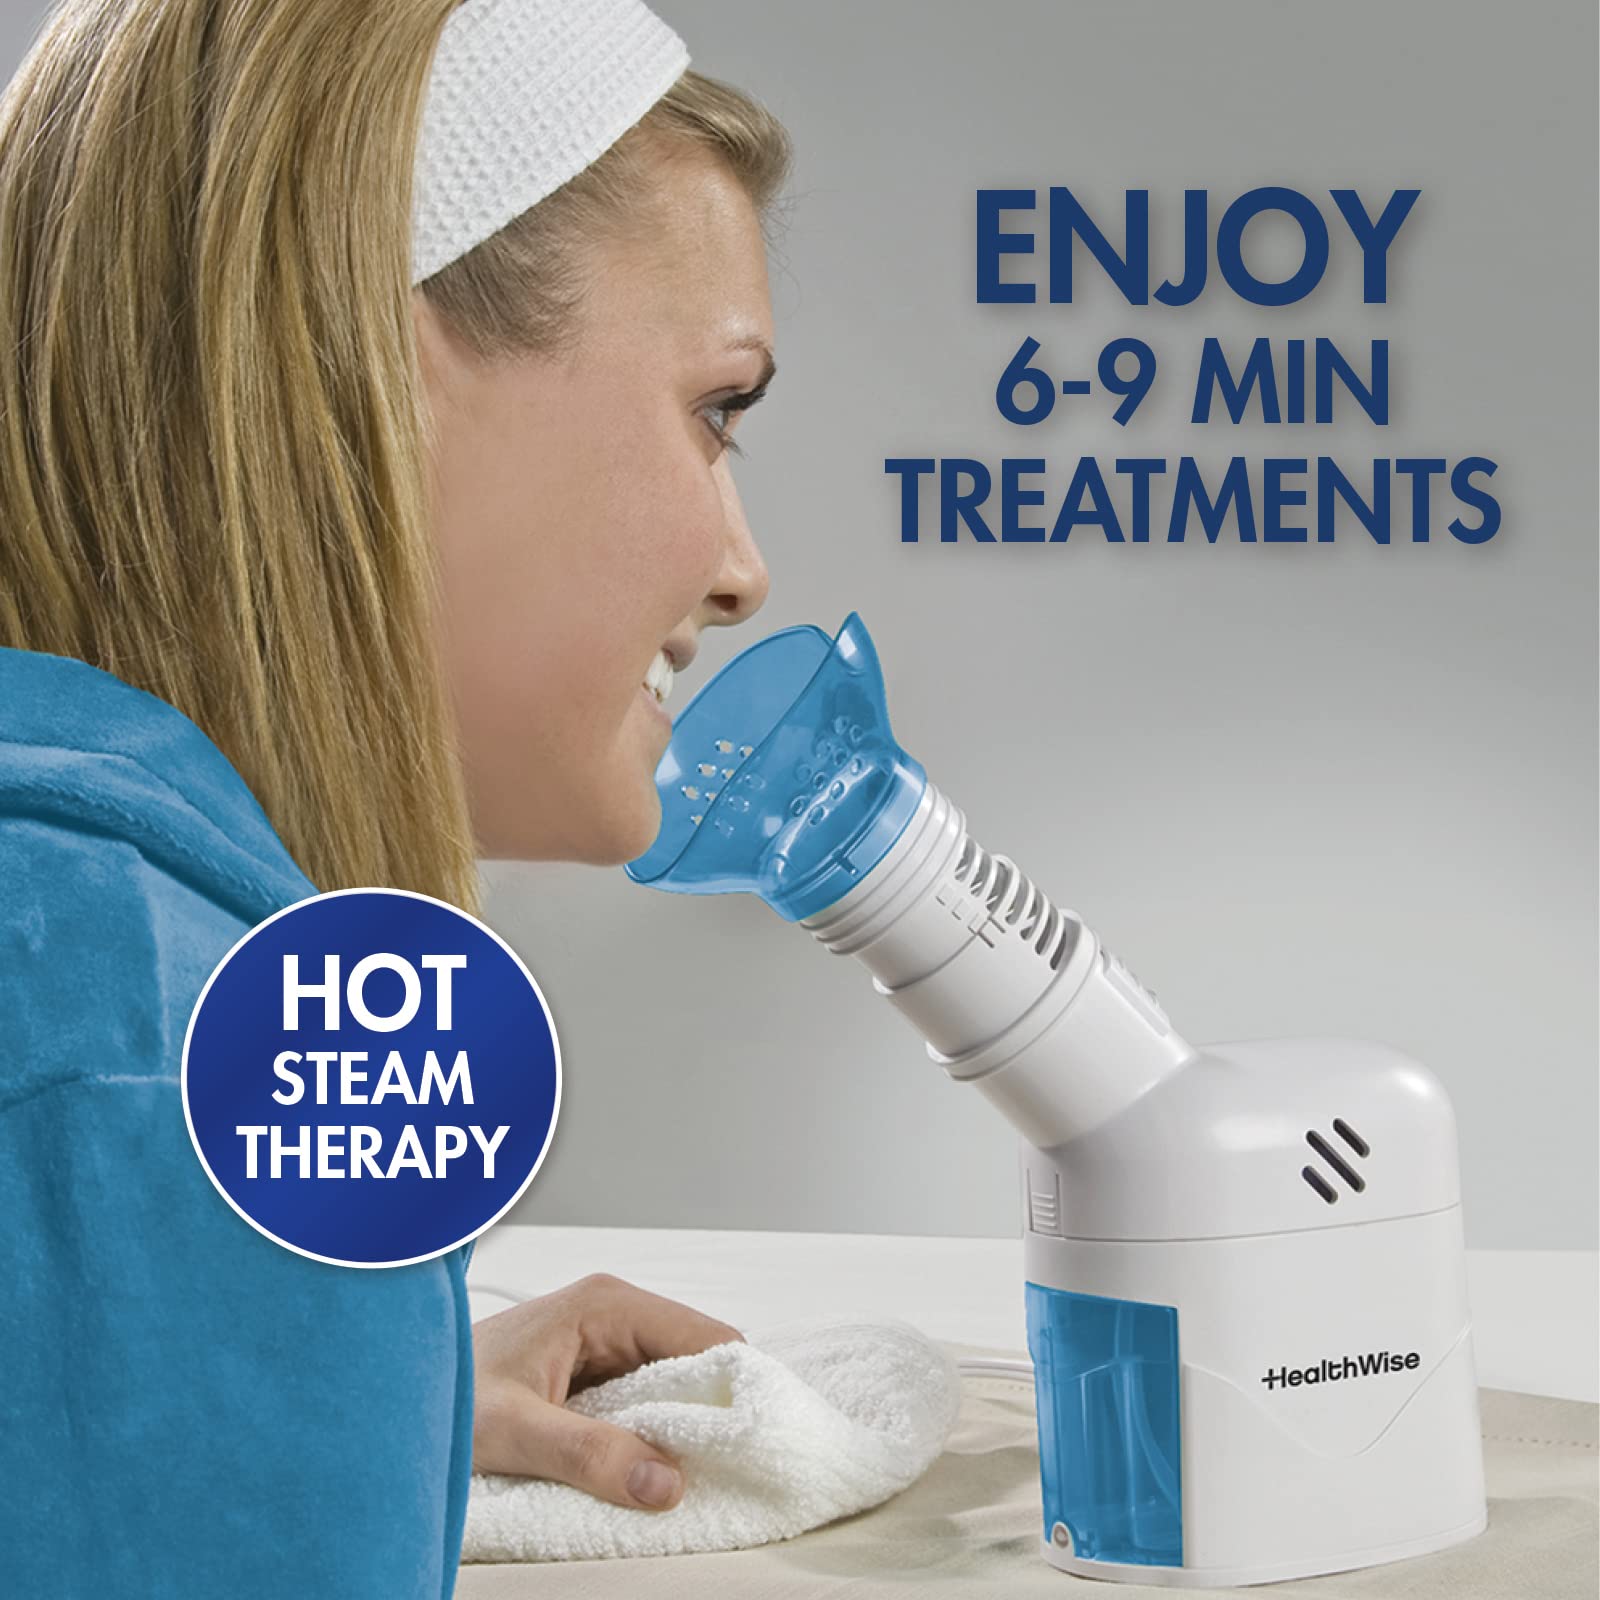 HealthWise Steam Inhaler Respiratory Vapor Therapy | Sinus Pressure, Congestion, Colds & Cough Relief | Mask for Cleansing